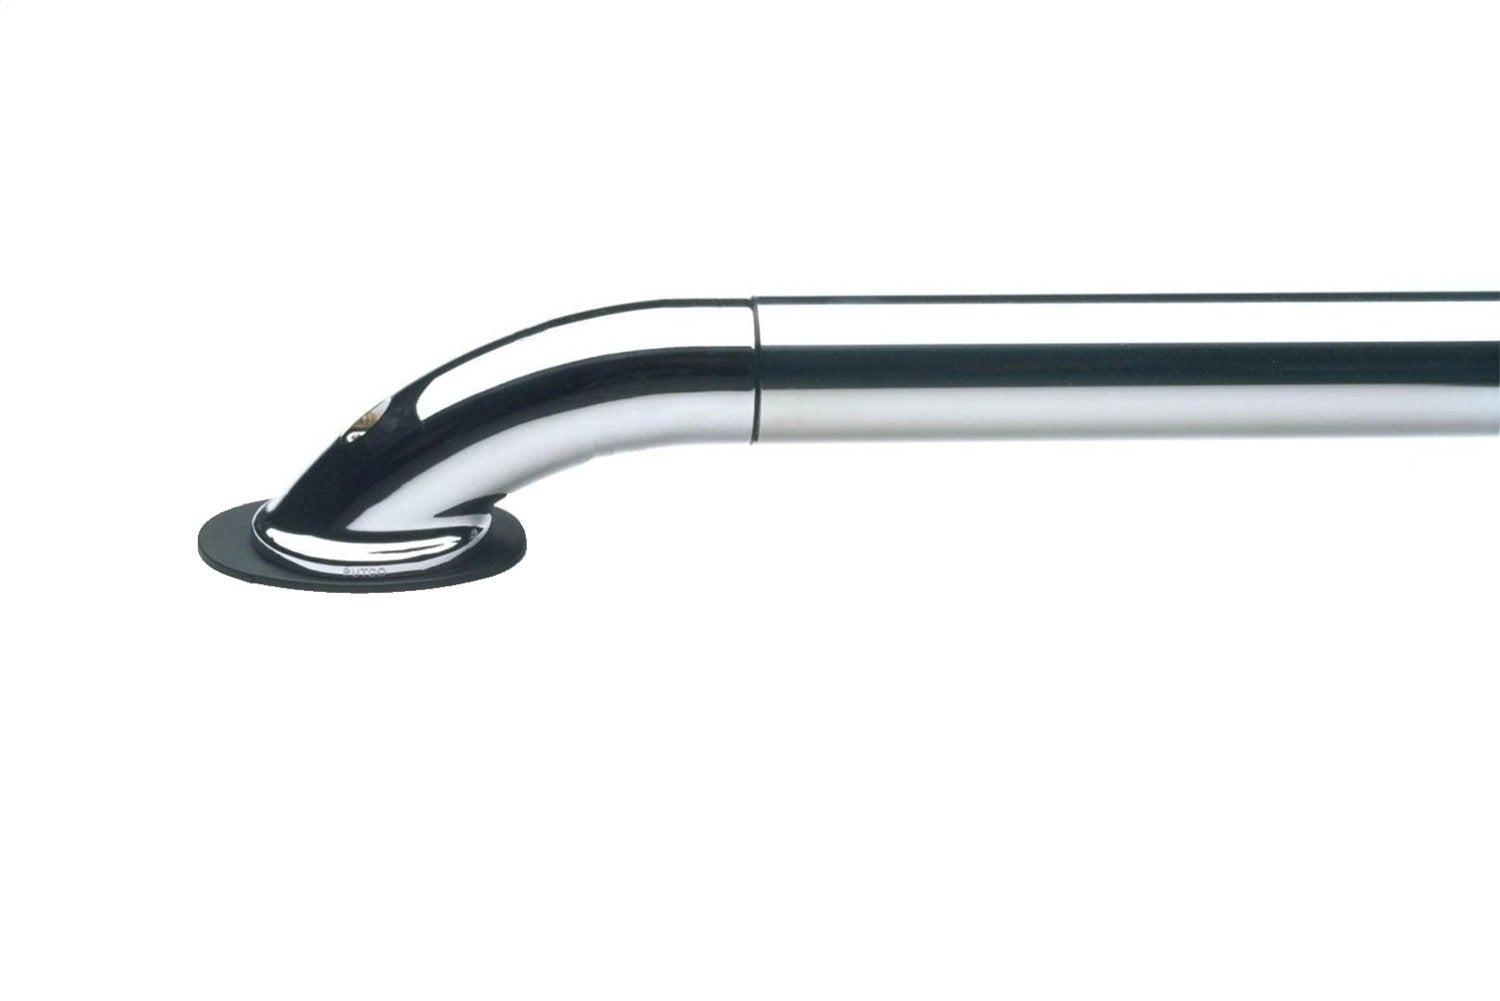 Putco 59833 Bed Rails, Approx. 6 ft. 5 in. Polished